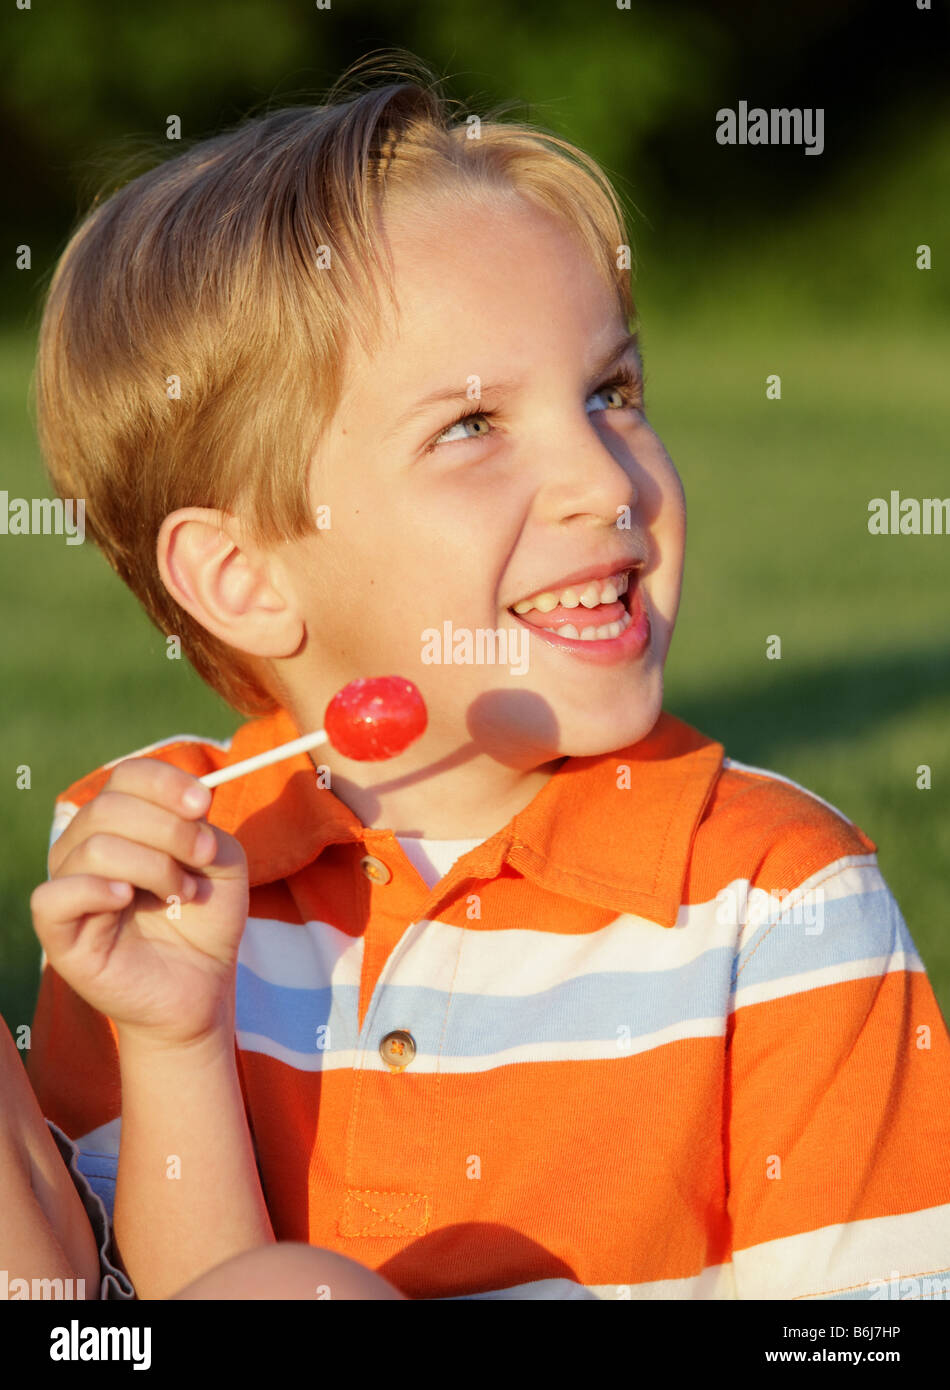 happy young white boy eating a sucker Stock Photo